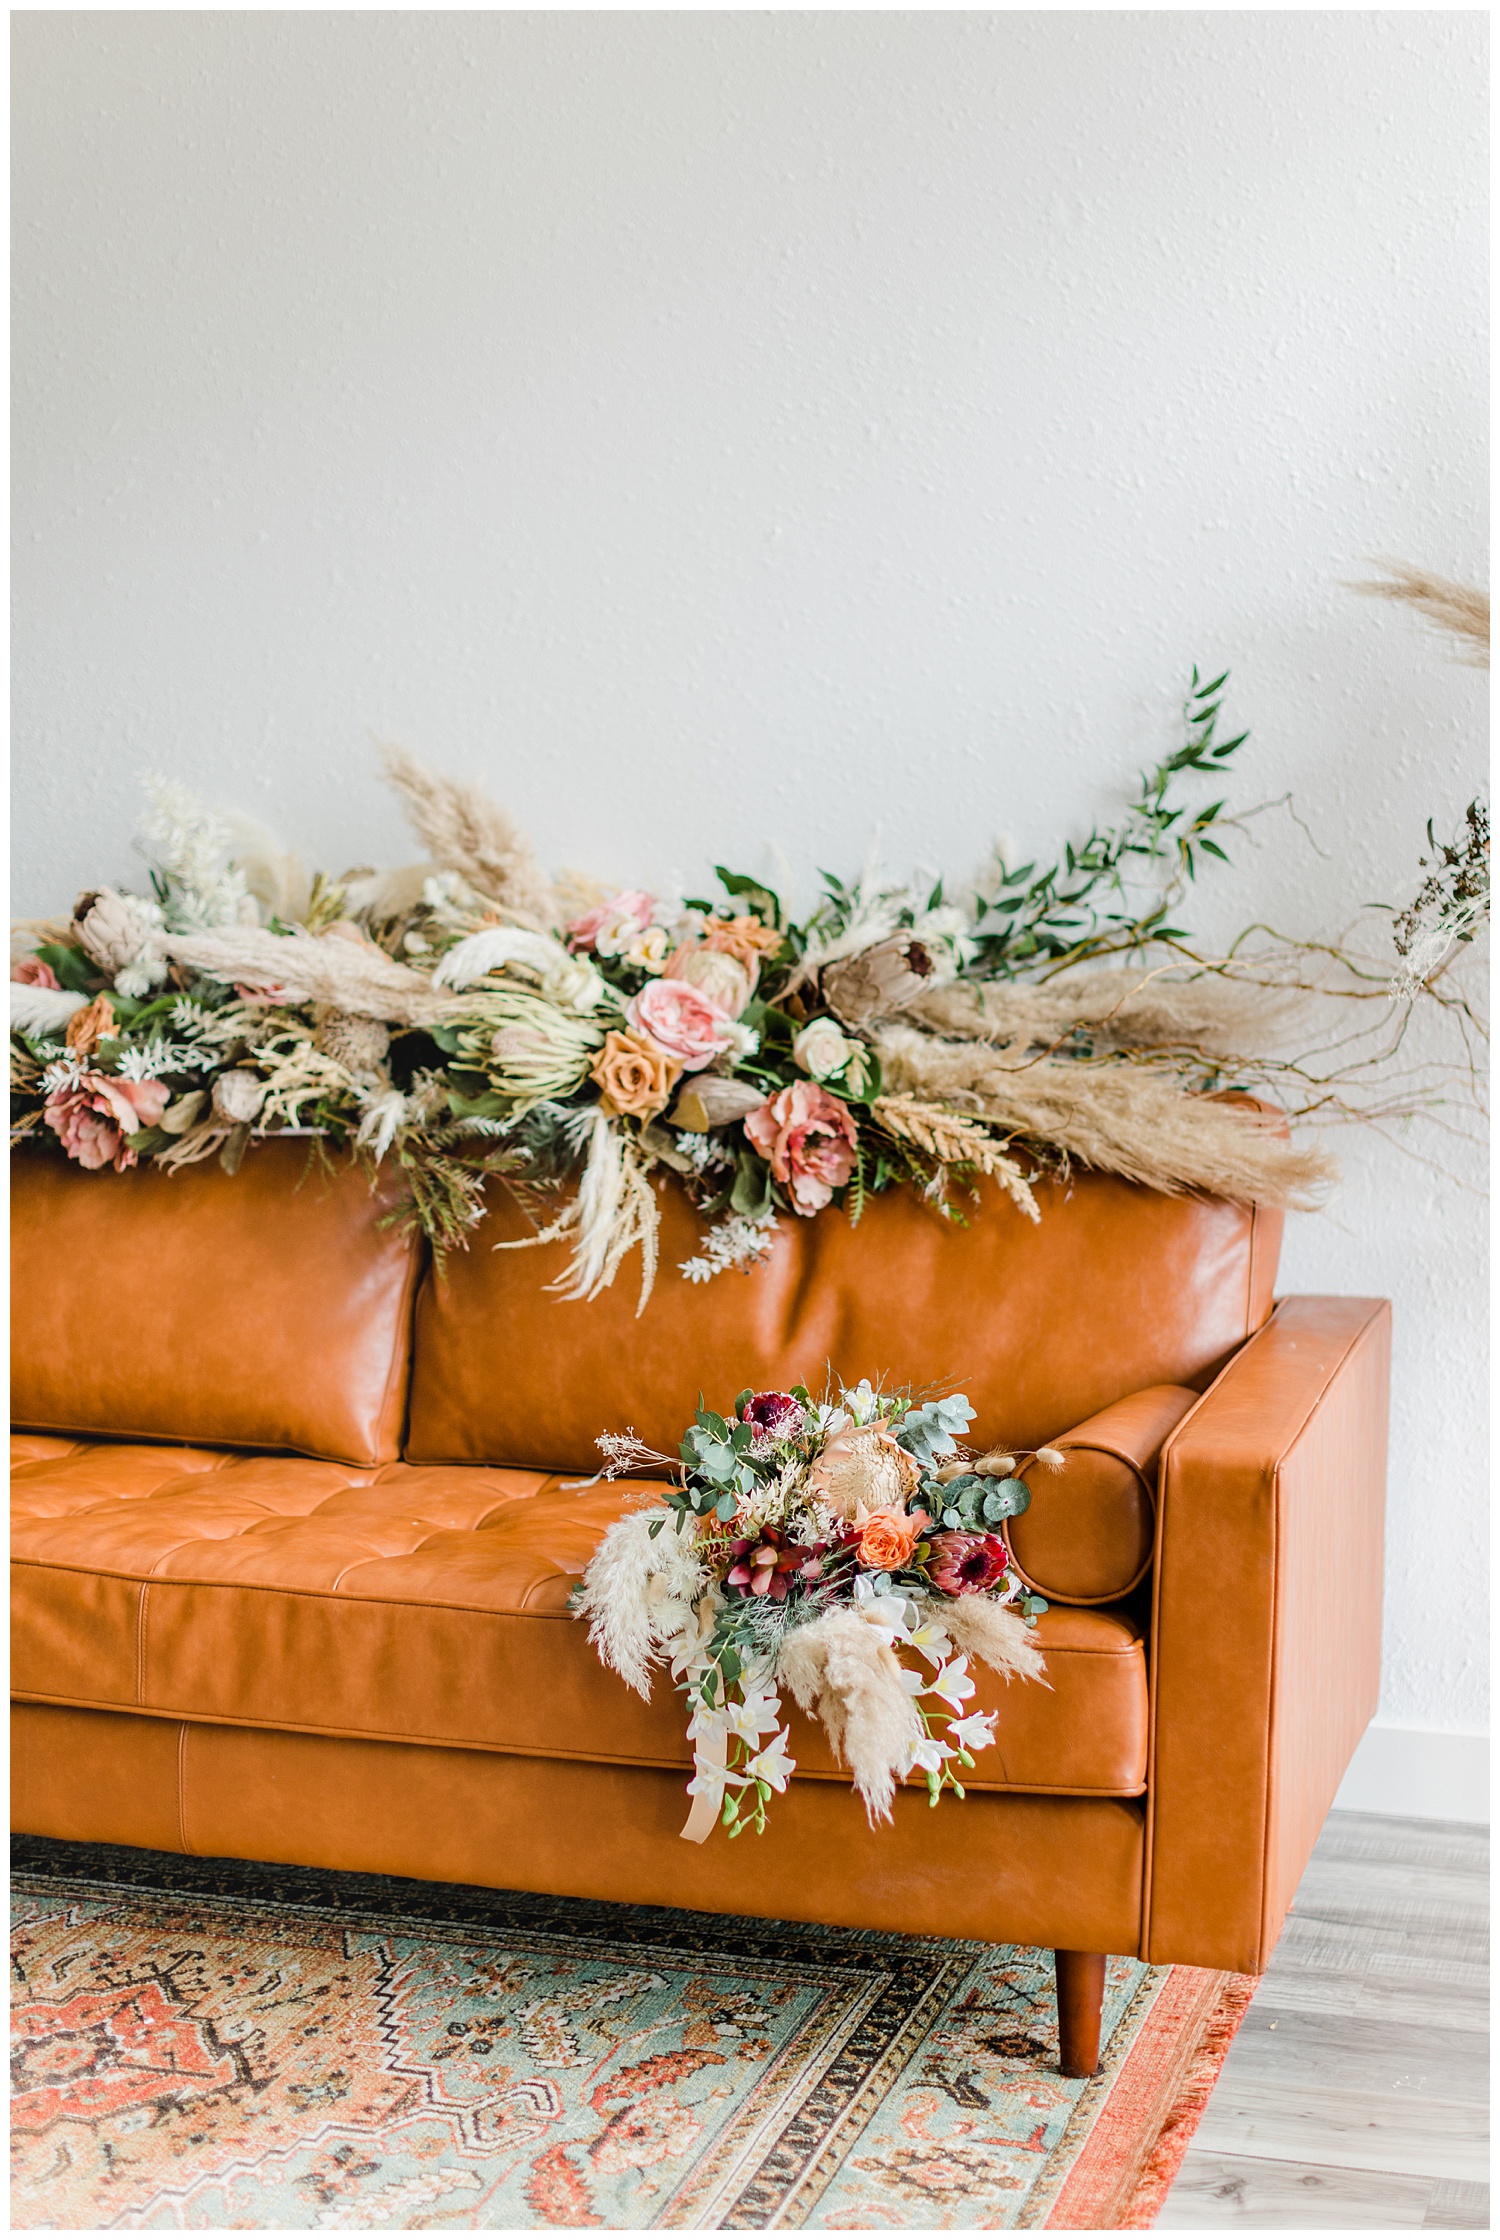 Vintage Boho floral couch arrangement and bridal bouquet complete with pampas grass, roses, eucalyptus and other dried florals | CB Studio